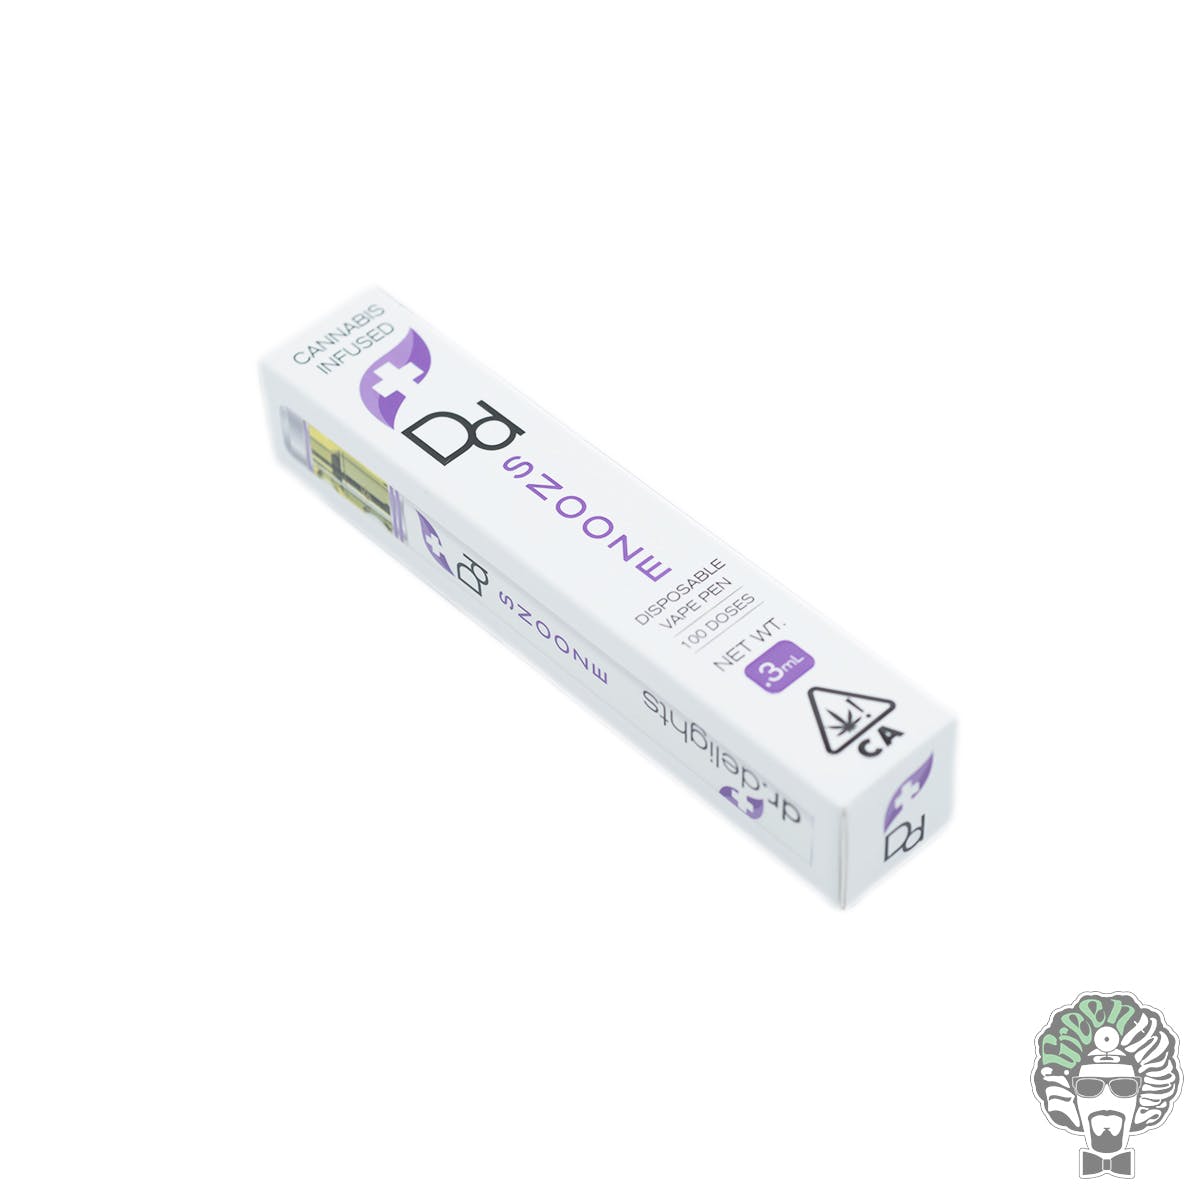 THC Snooze Disposable Vape Cartridge by Dr. Delight